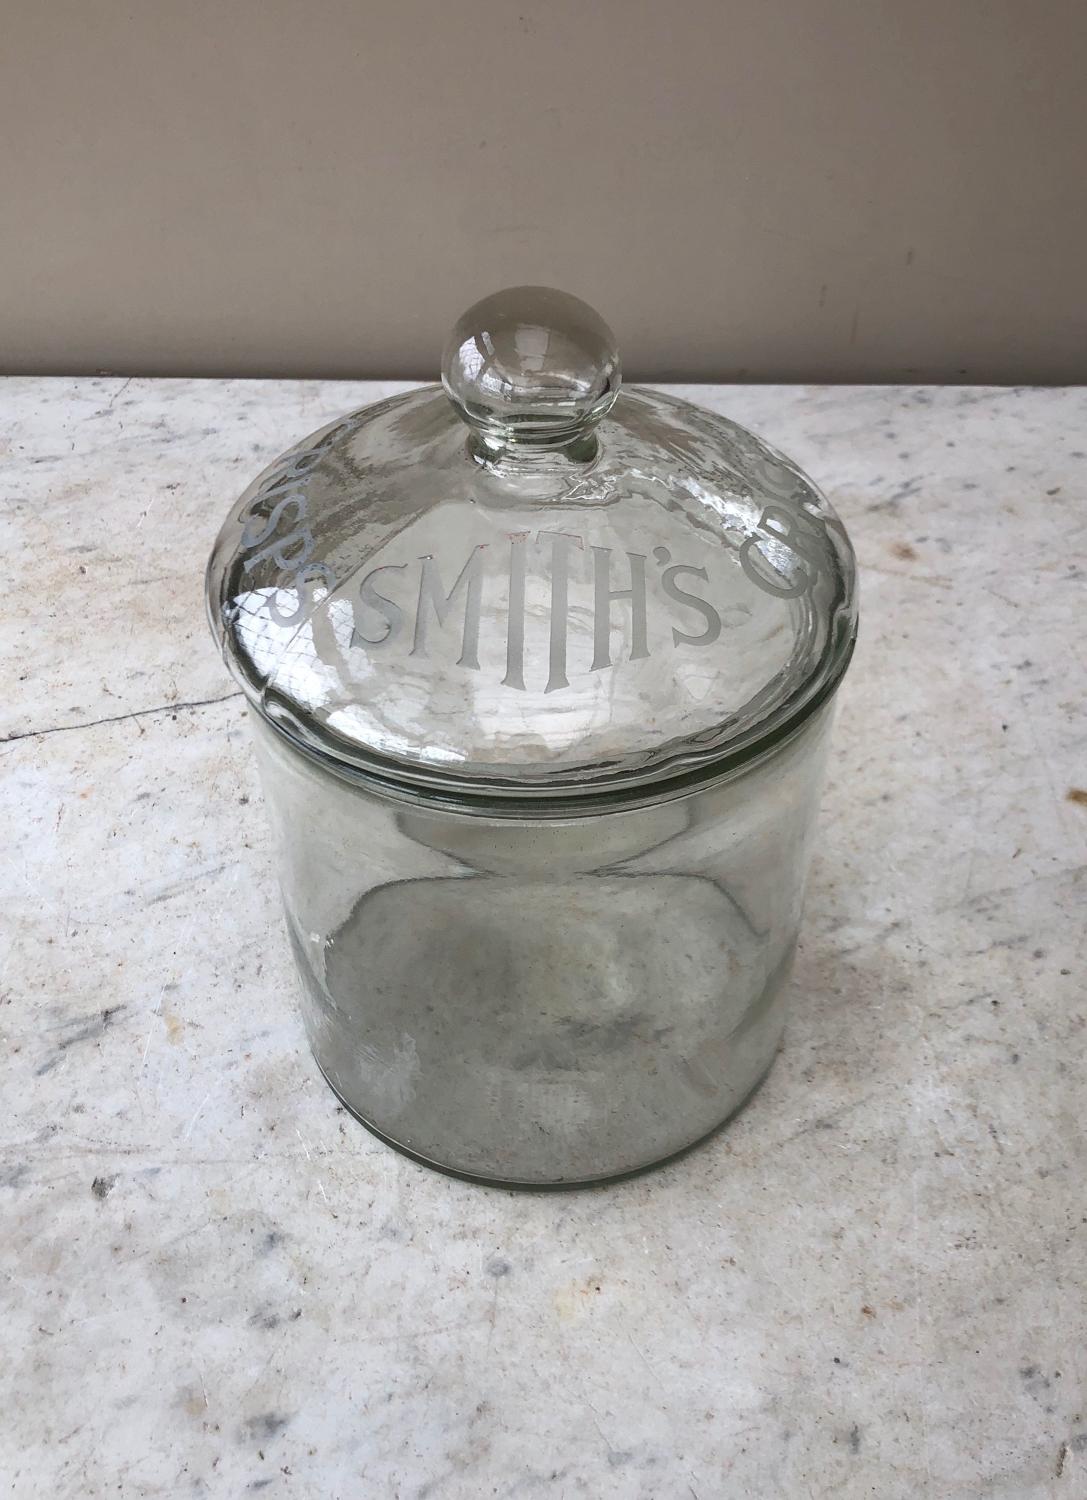 Early 20thC Glass Shops Counter Top Advertising Jar - Smiths Crisps